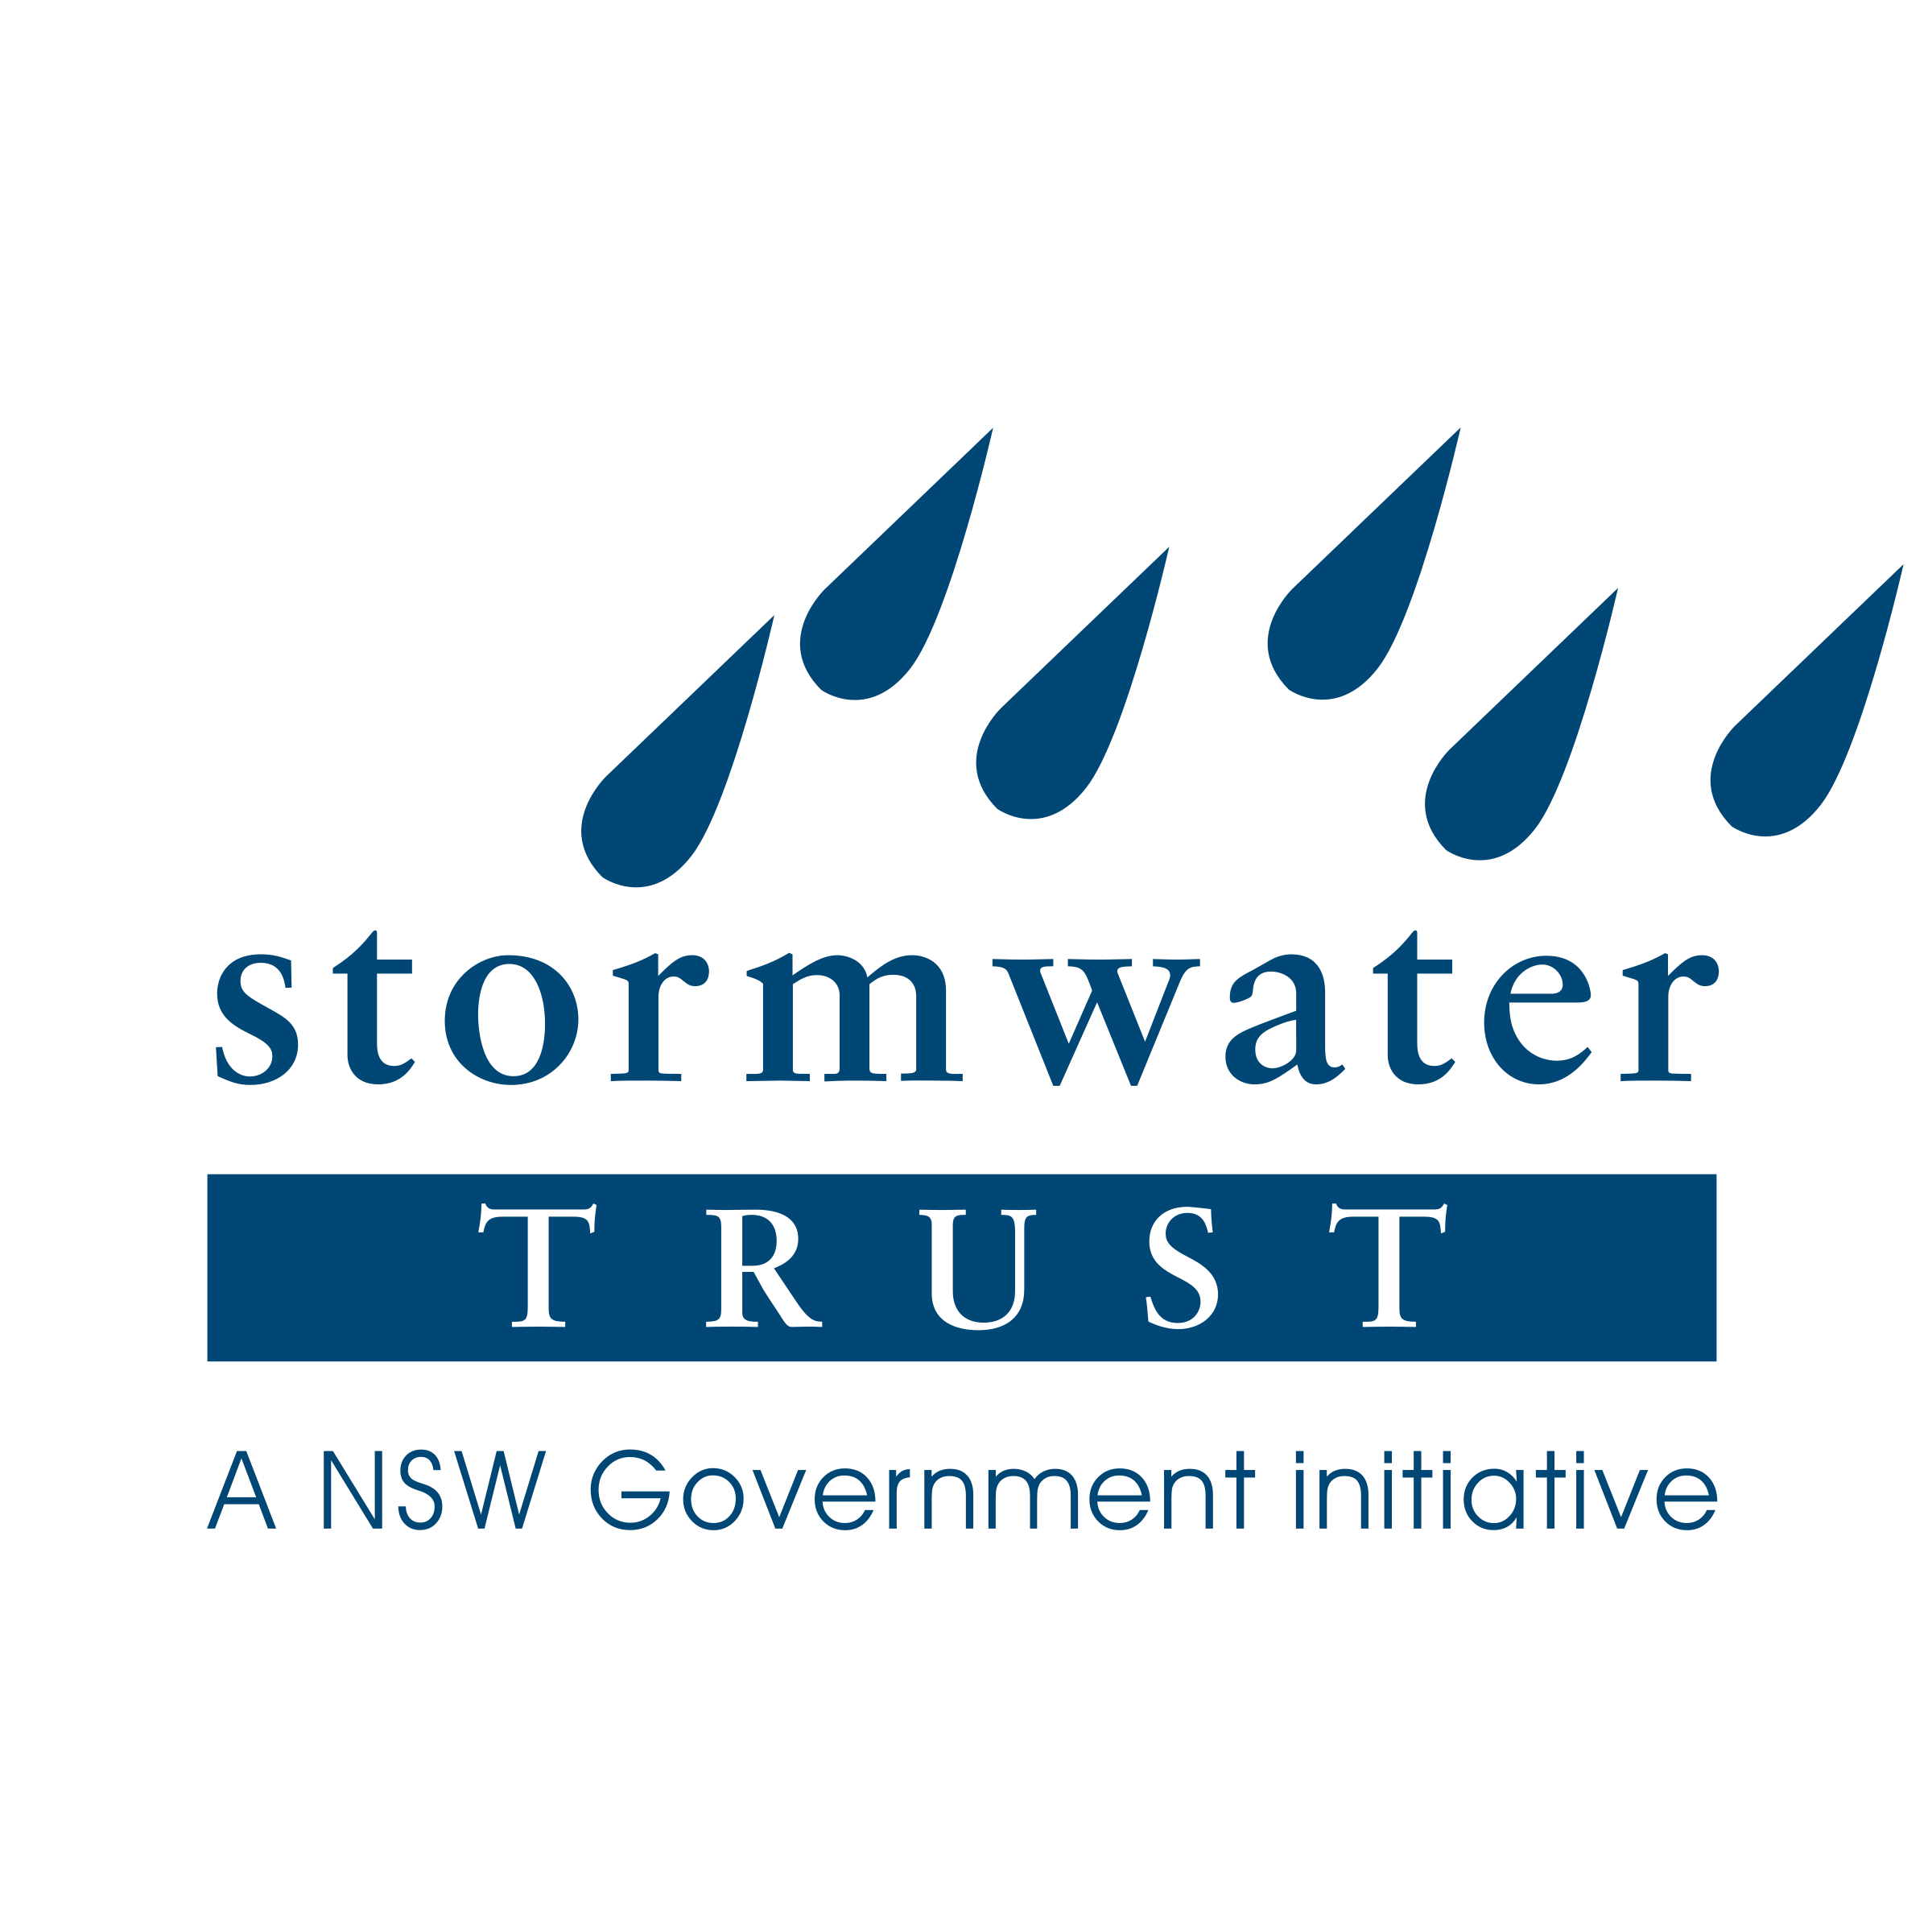 Stormwater Logo - Stormwater Trust Logo PNG Transparent & SVG Vector - Freebie Supply